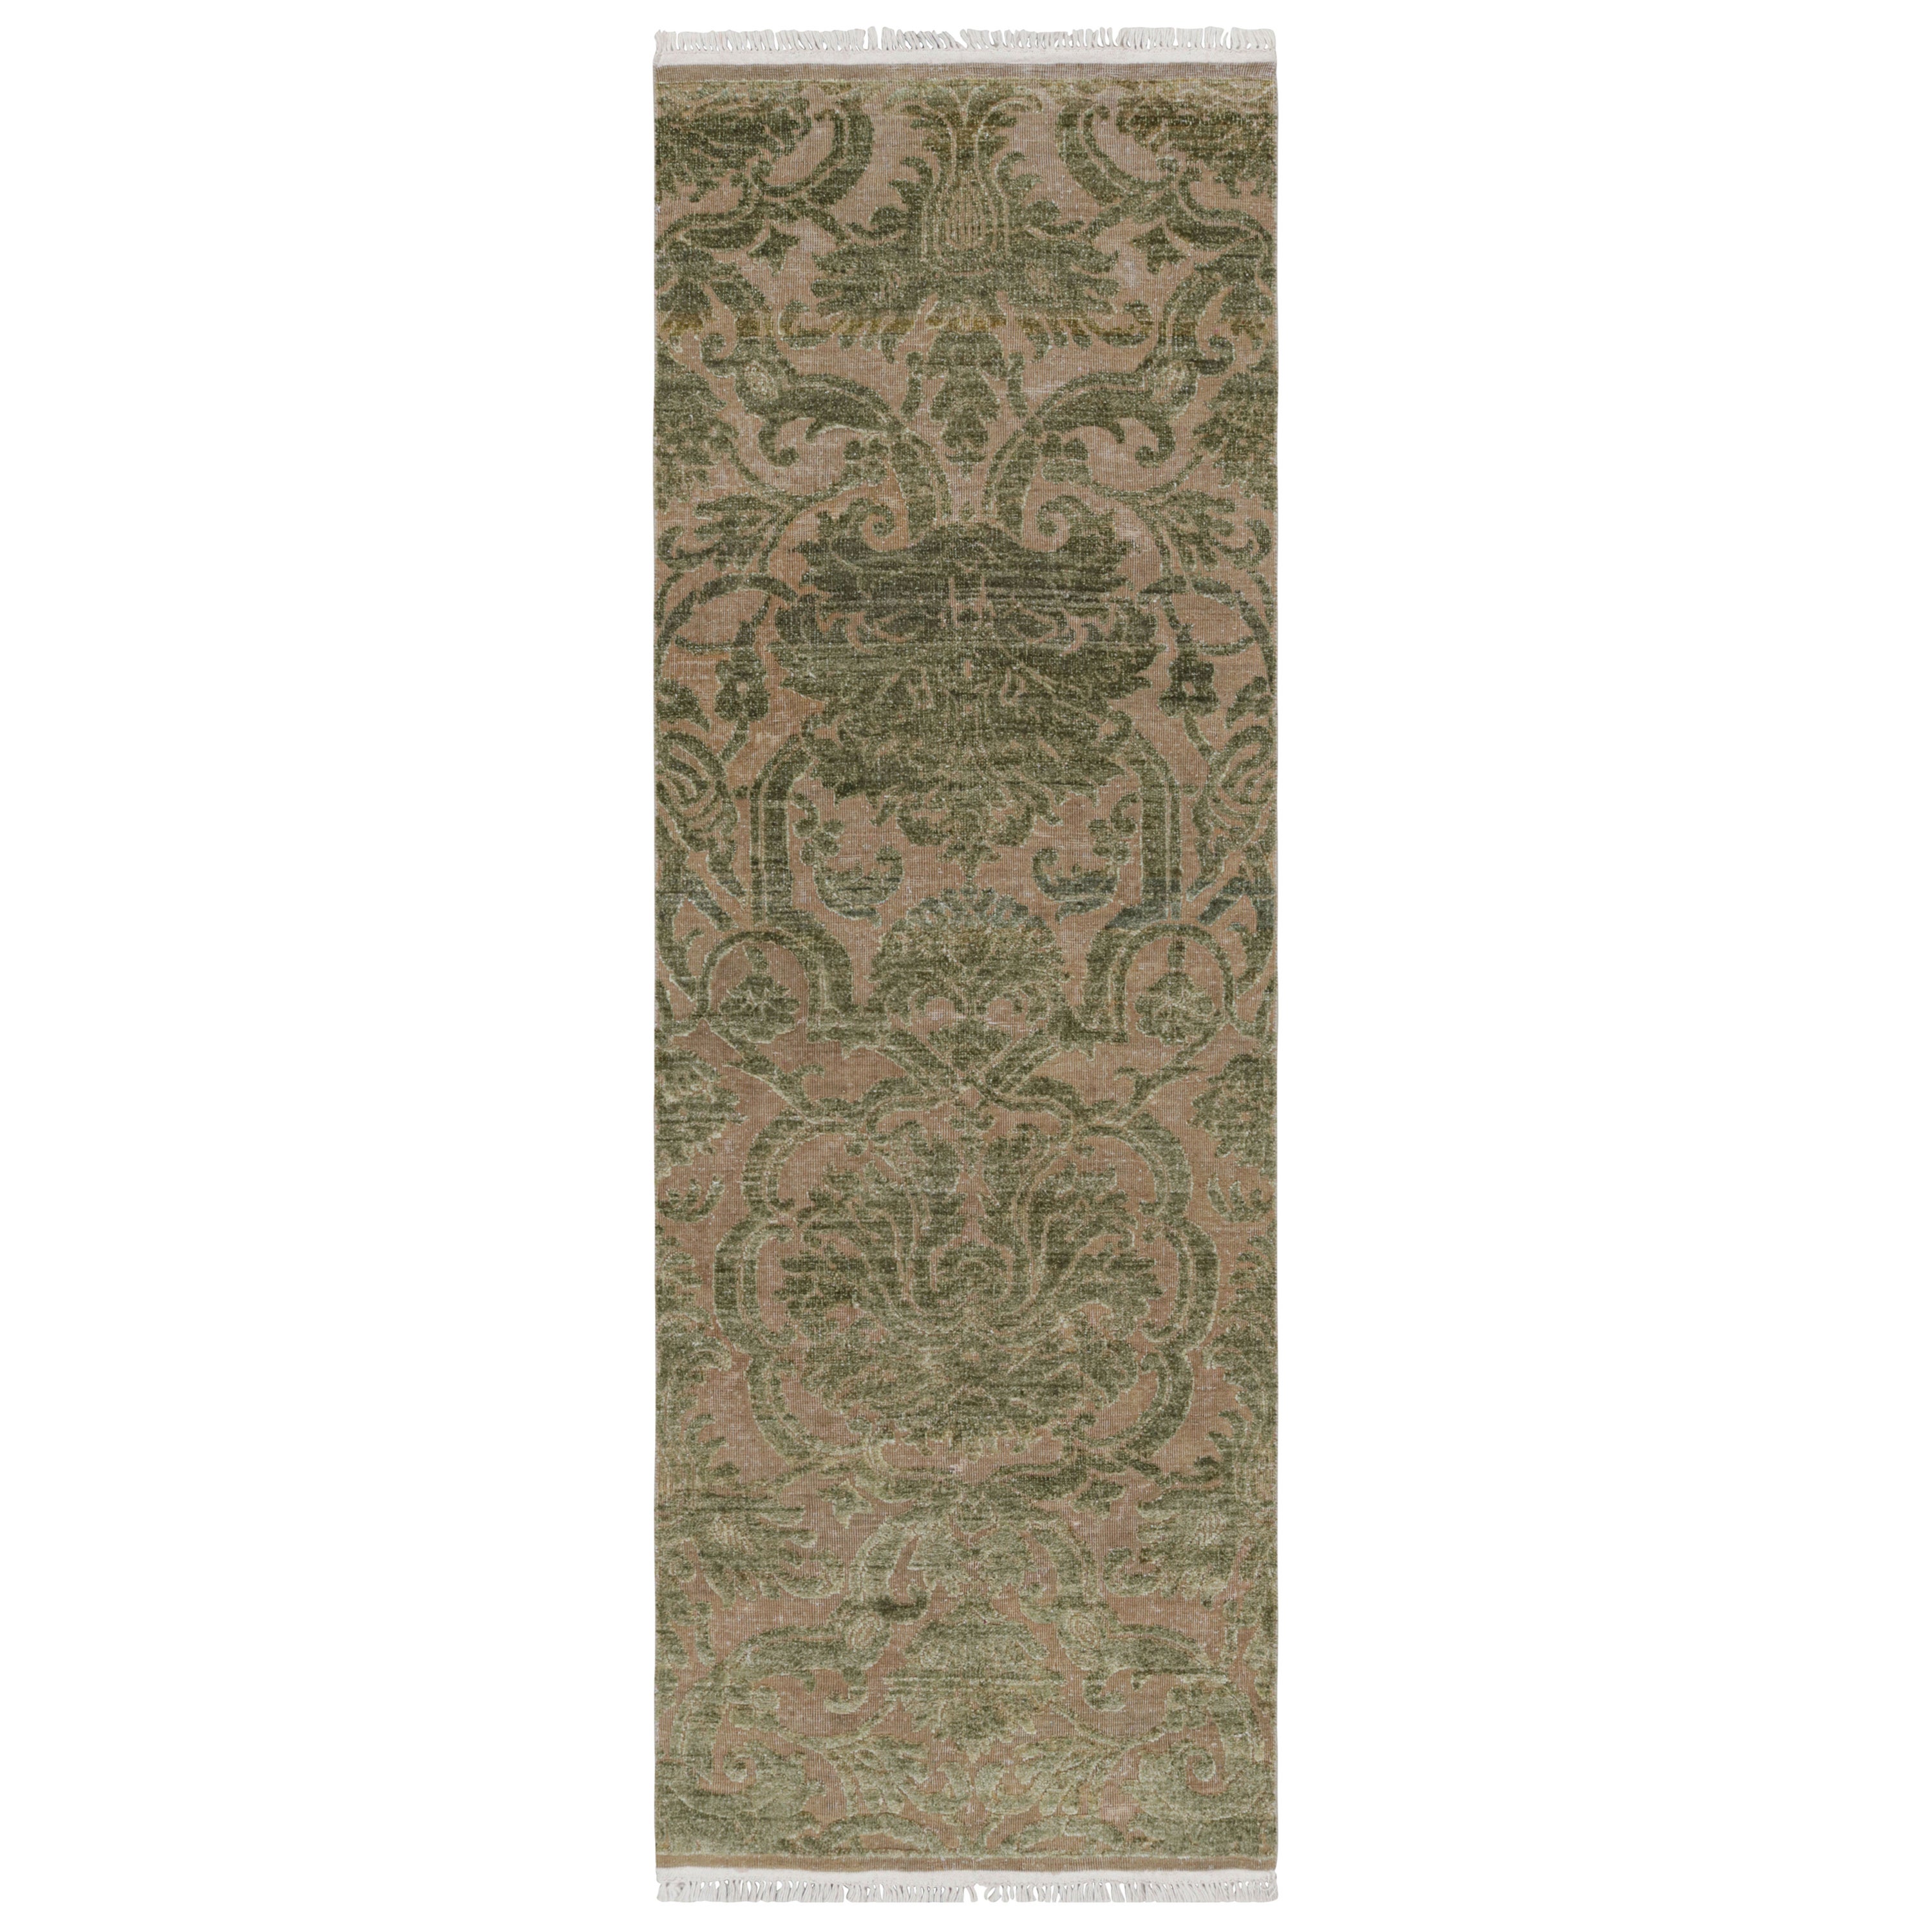 Rug & Kilim’s European Style Runner in Beige with Floral Patterns by Rug & Kilim For Sale